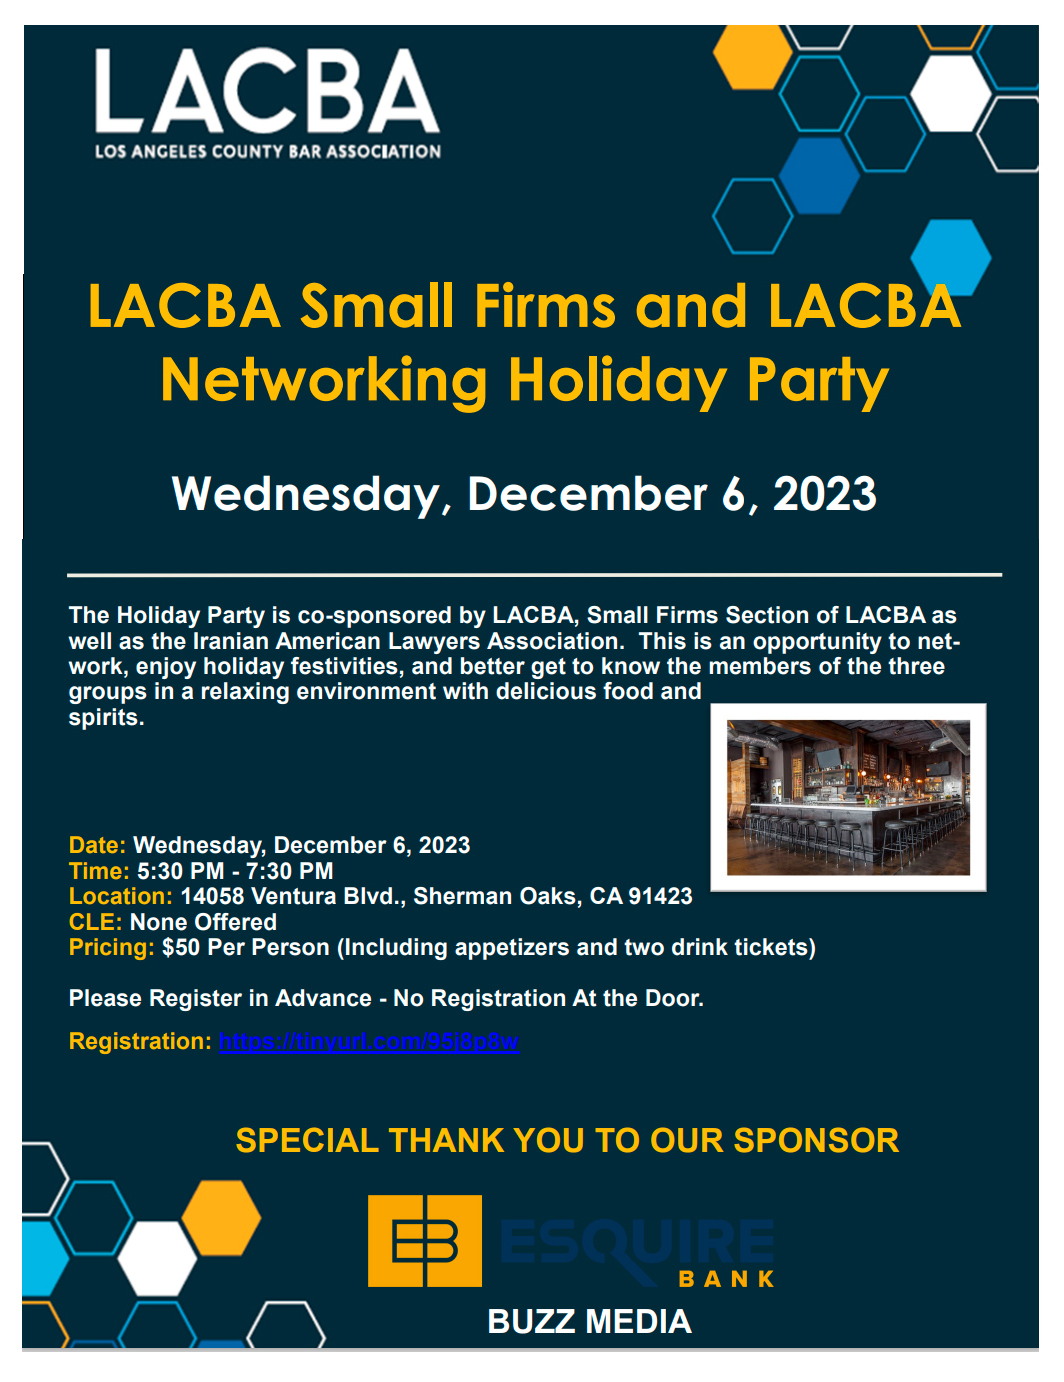 LACBA Small Firm and LACBA Networking Holiday